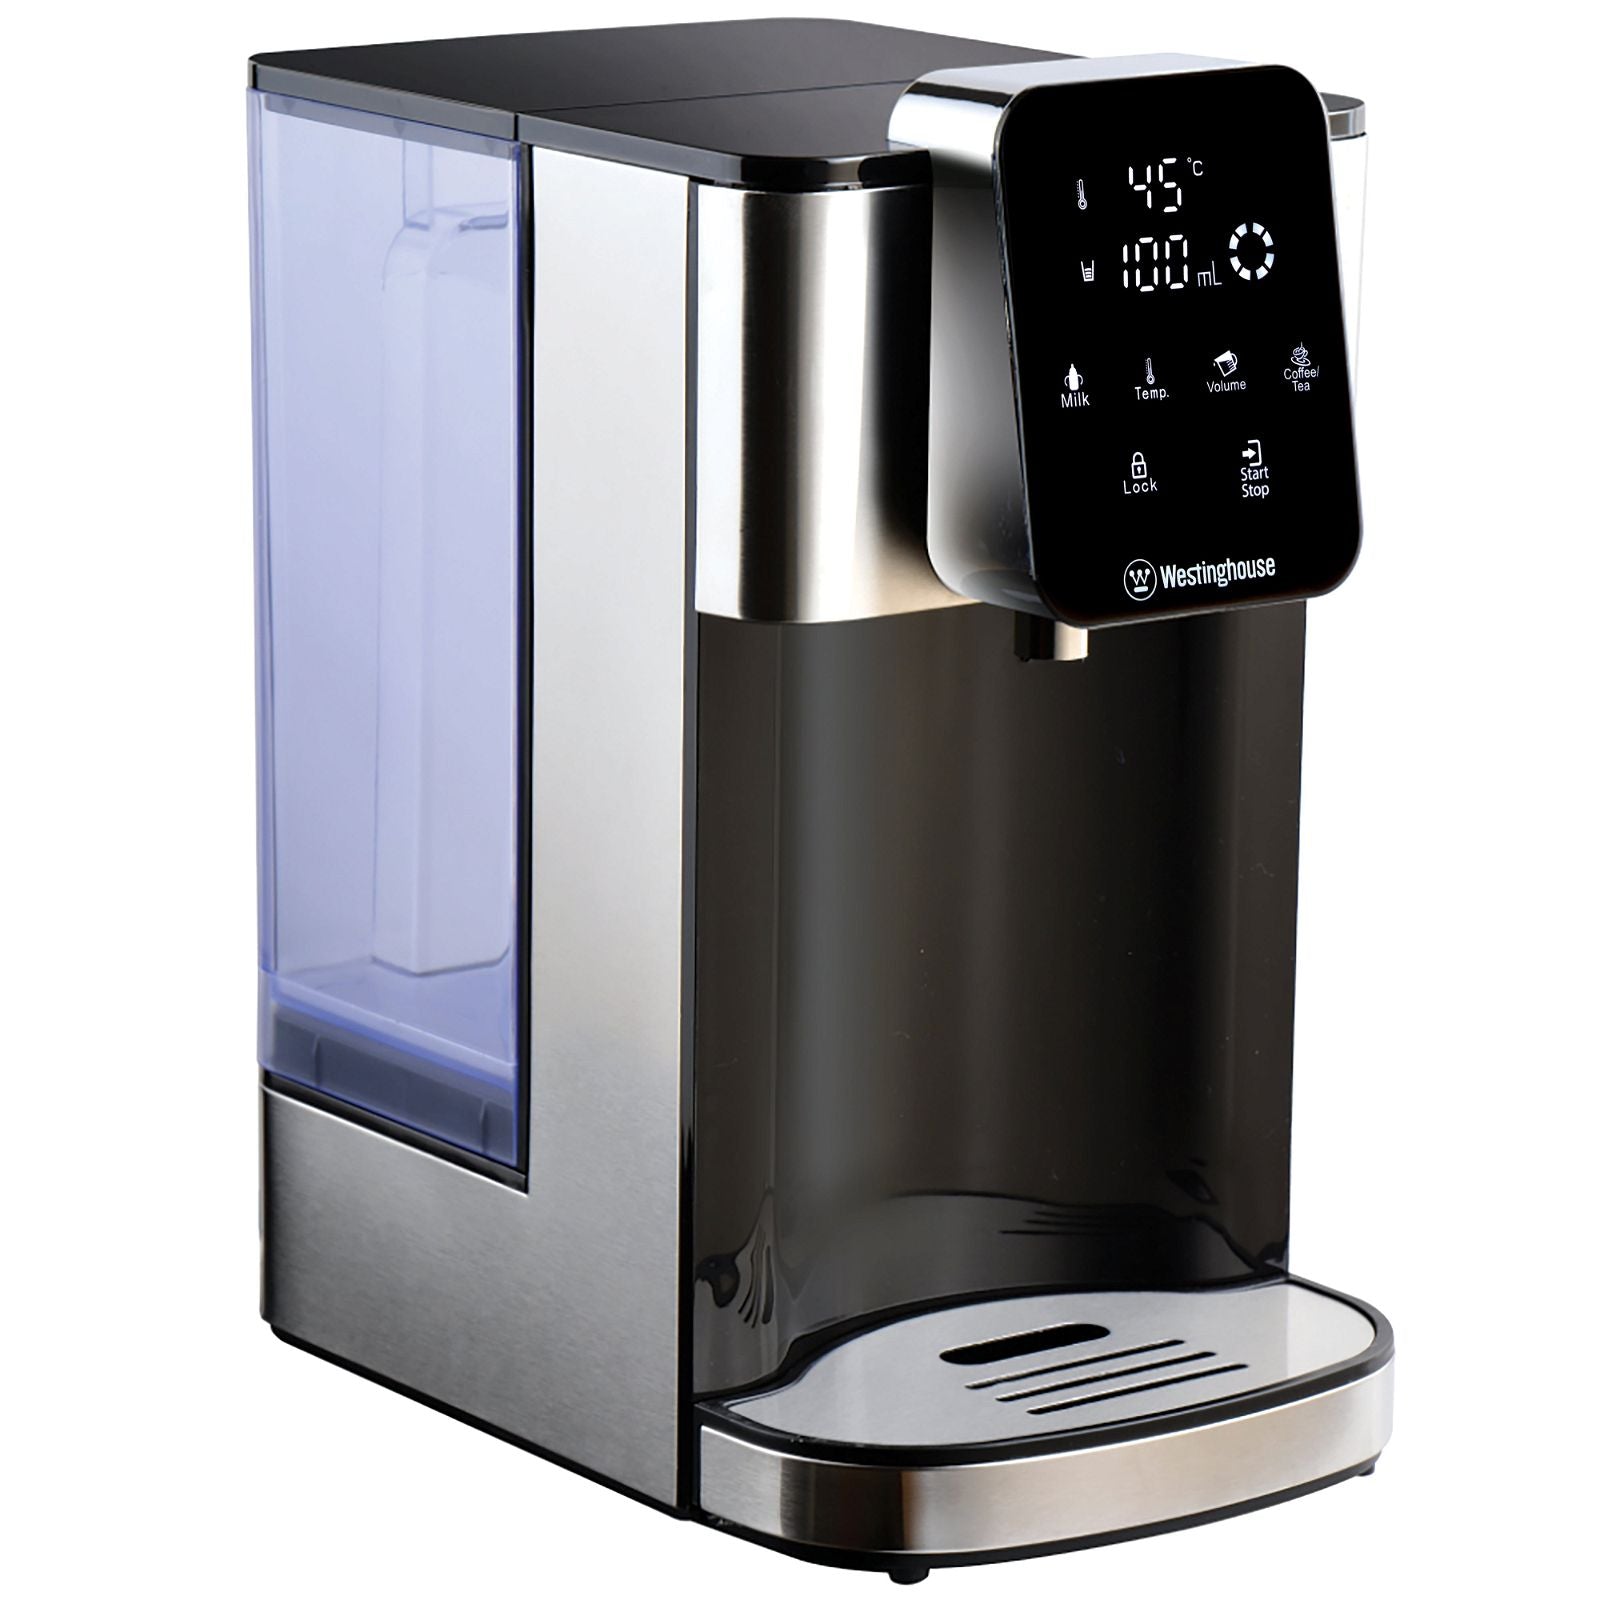 Westinghouse Instant Hot Water Dispenser 4L Removable Jug Stainless Steel-#product_category#- Distributed by:  under license